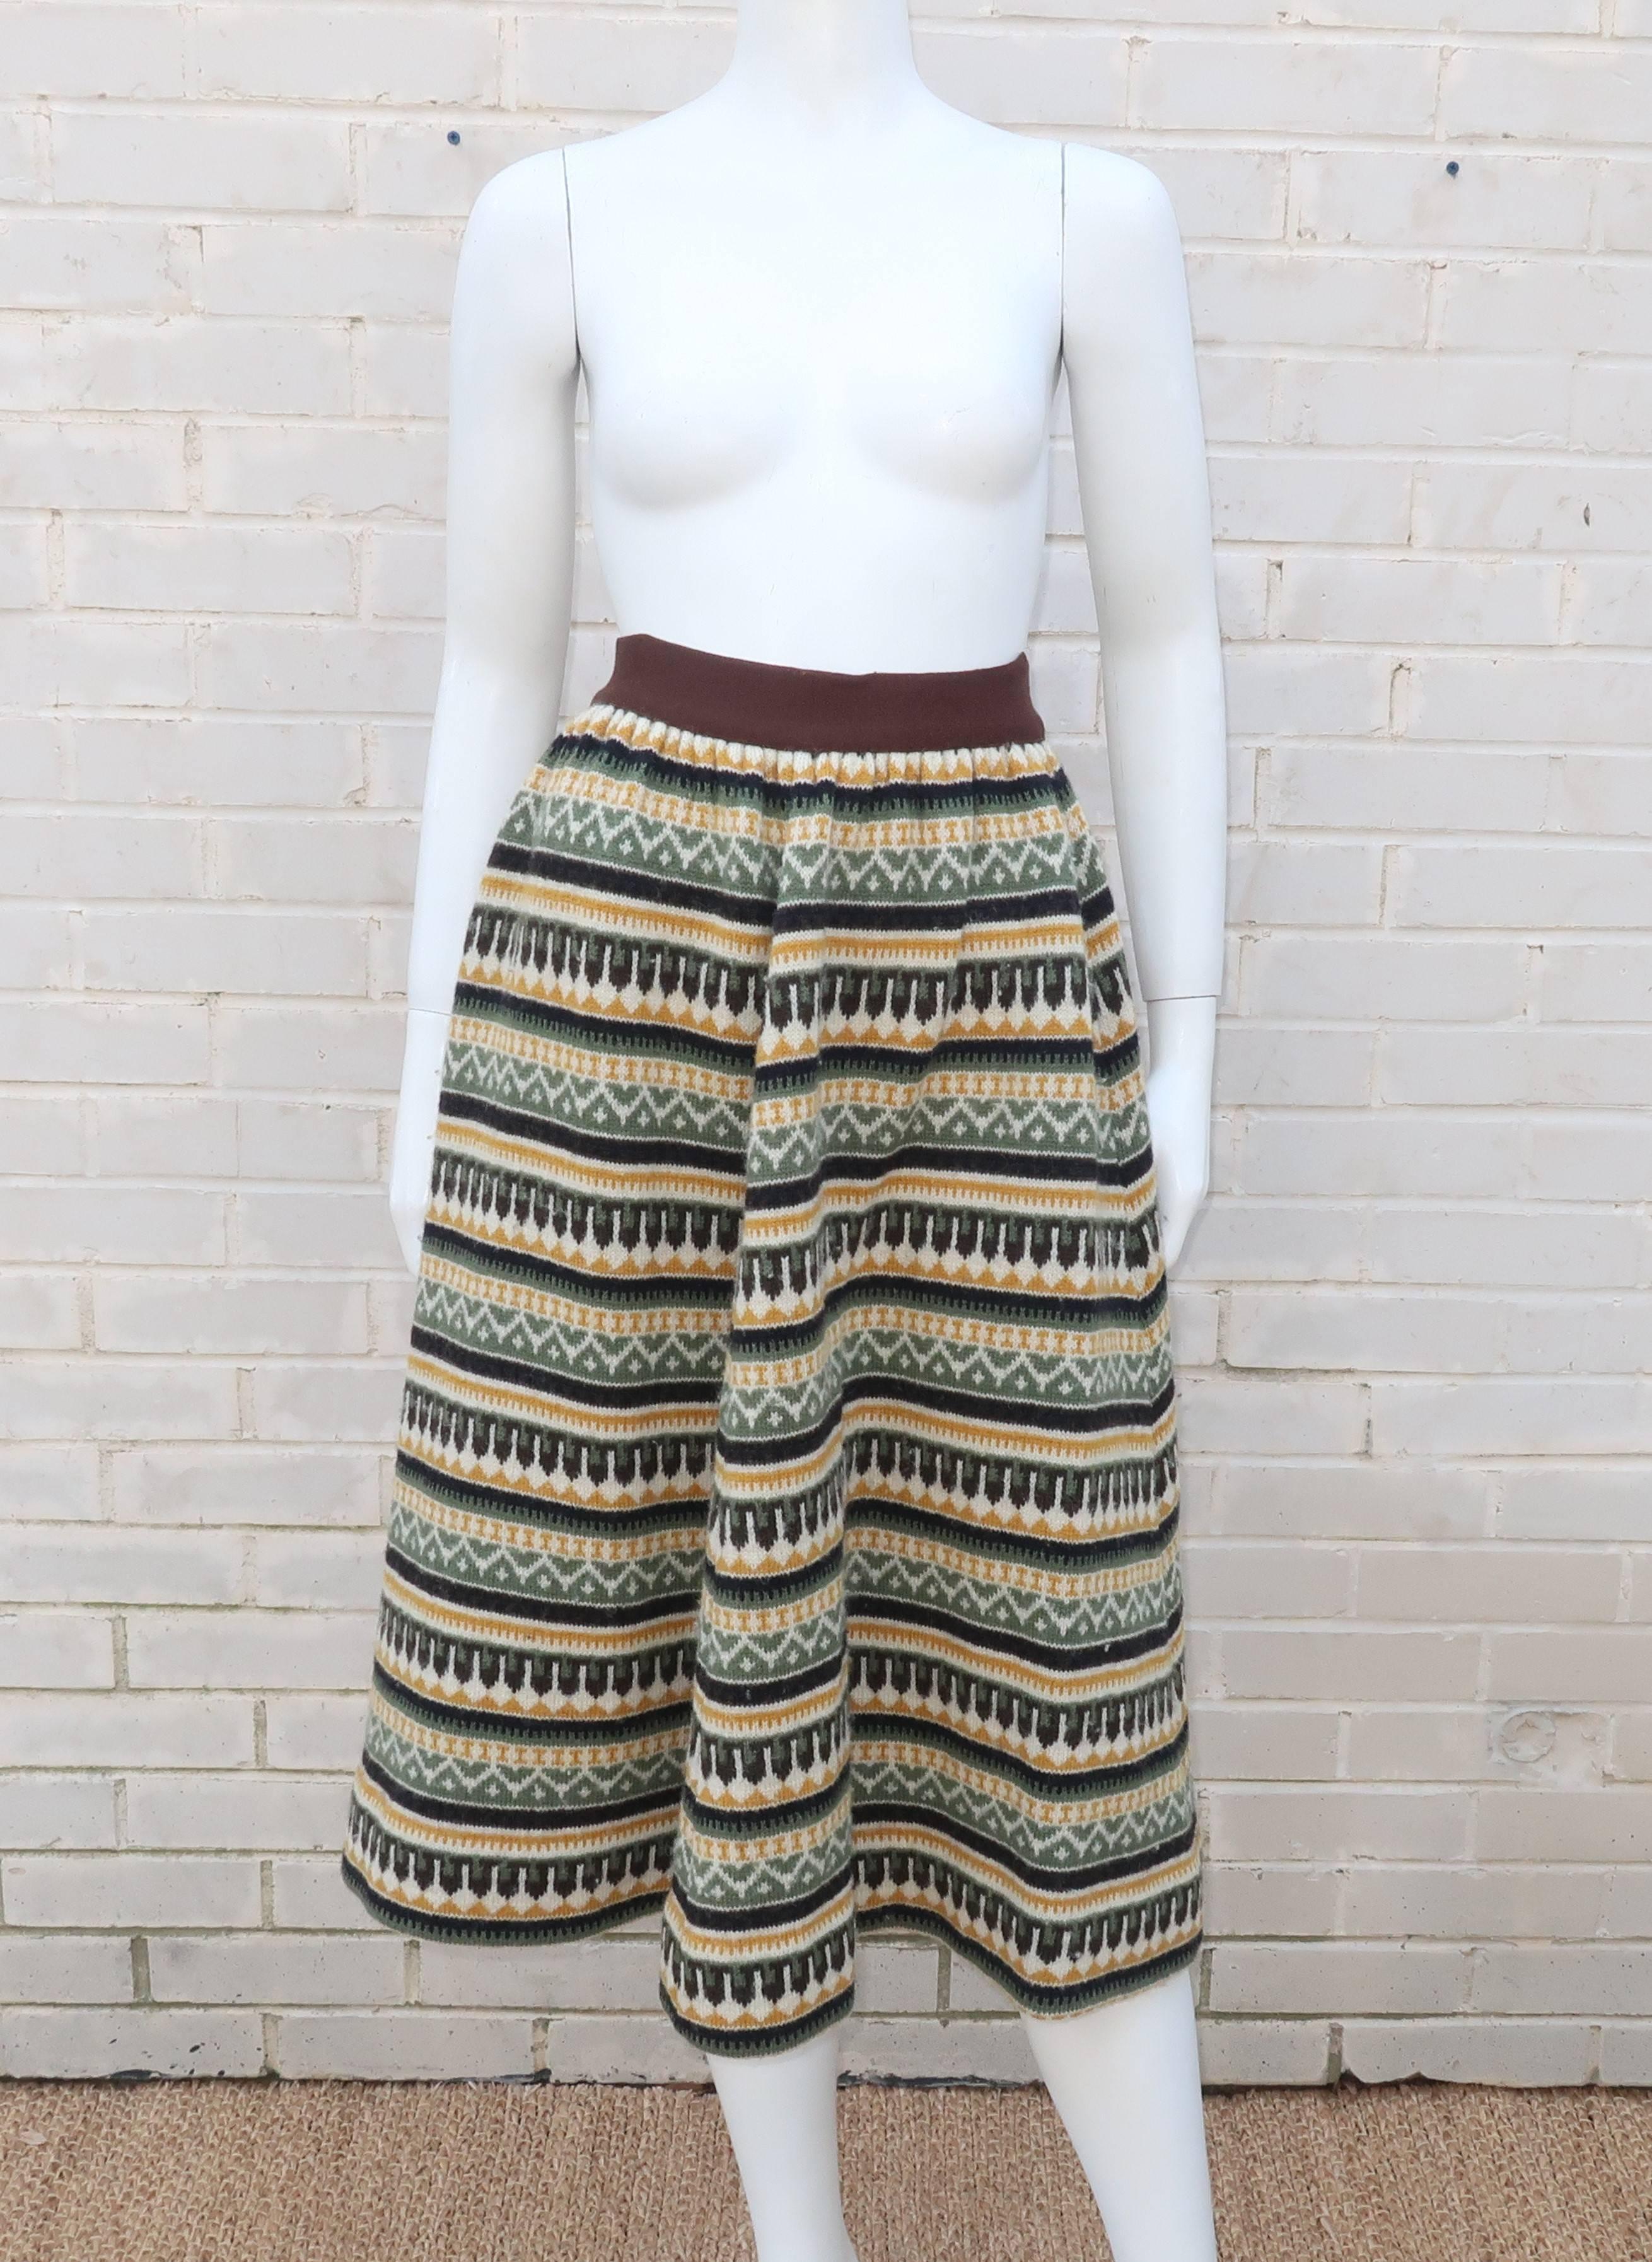 Wearing a sweater around your waist has never been so fun!  This wool knit circular skirt from Jersey Modeller of Sweden has Scandinavian sensibilities in the form of folkloric graphics and unique mid century style.  The skirt buttons and zips at